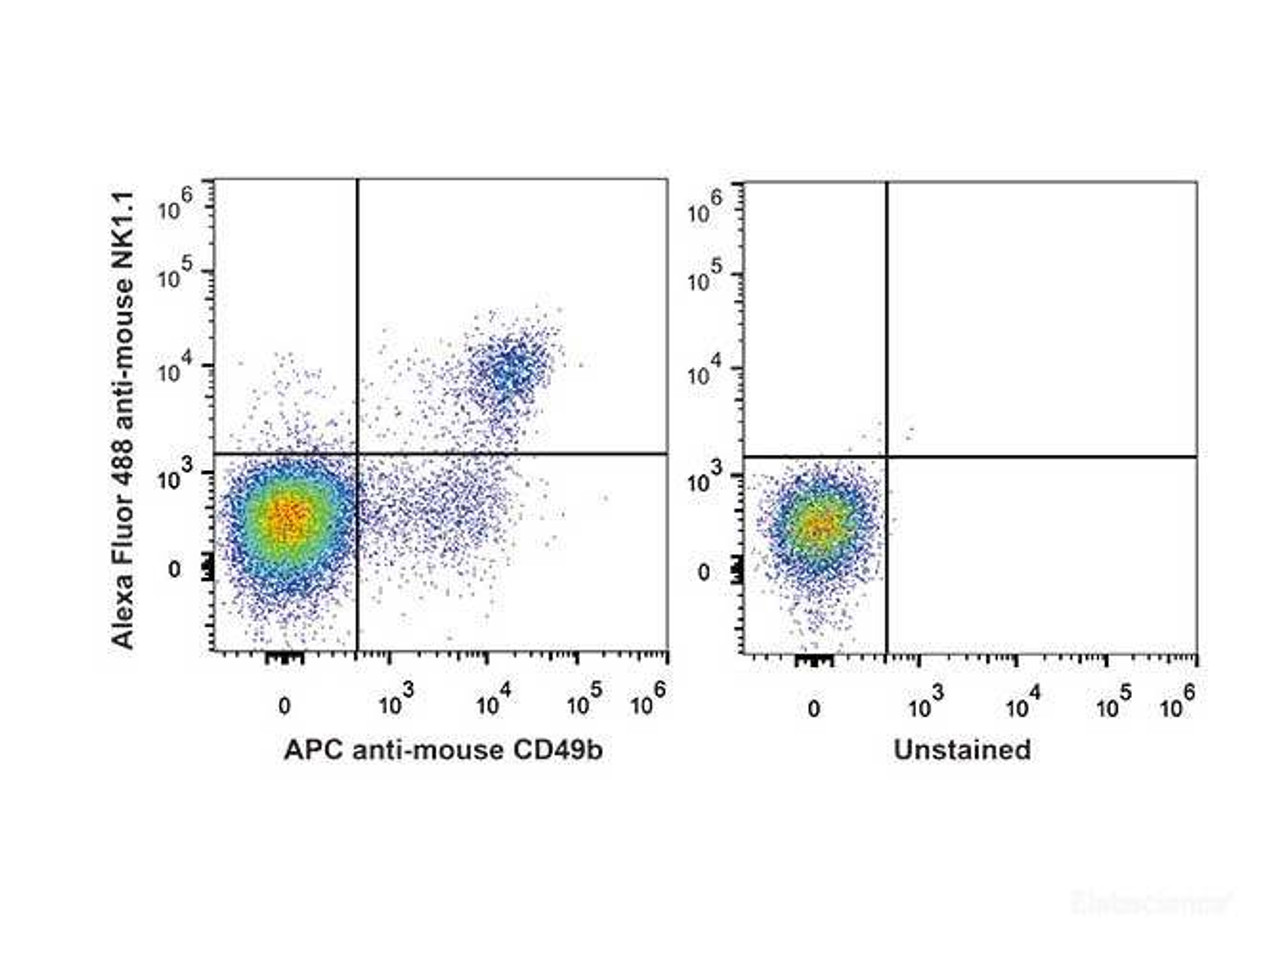 C57BL/6 murine splenocytes are stained with AF488 Anti-Mouse CD161/NK1.1 Antibody[Used at .2 μg/1<sup>6</sup> cells dilution] and APC Anti-Mouse CD49b Antibody. Unstained splenocytes are used as control(Right).